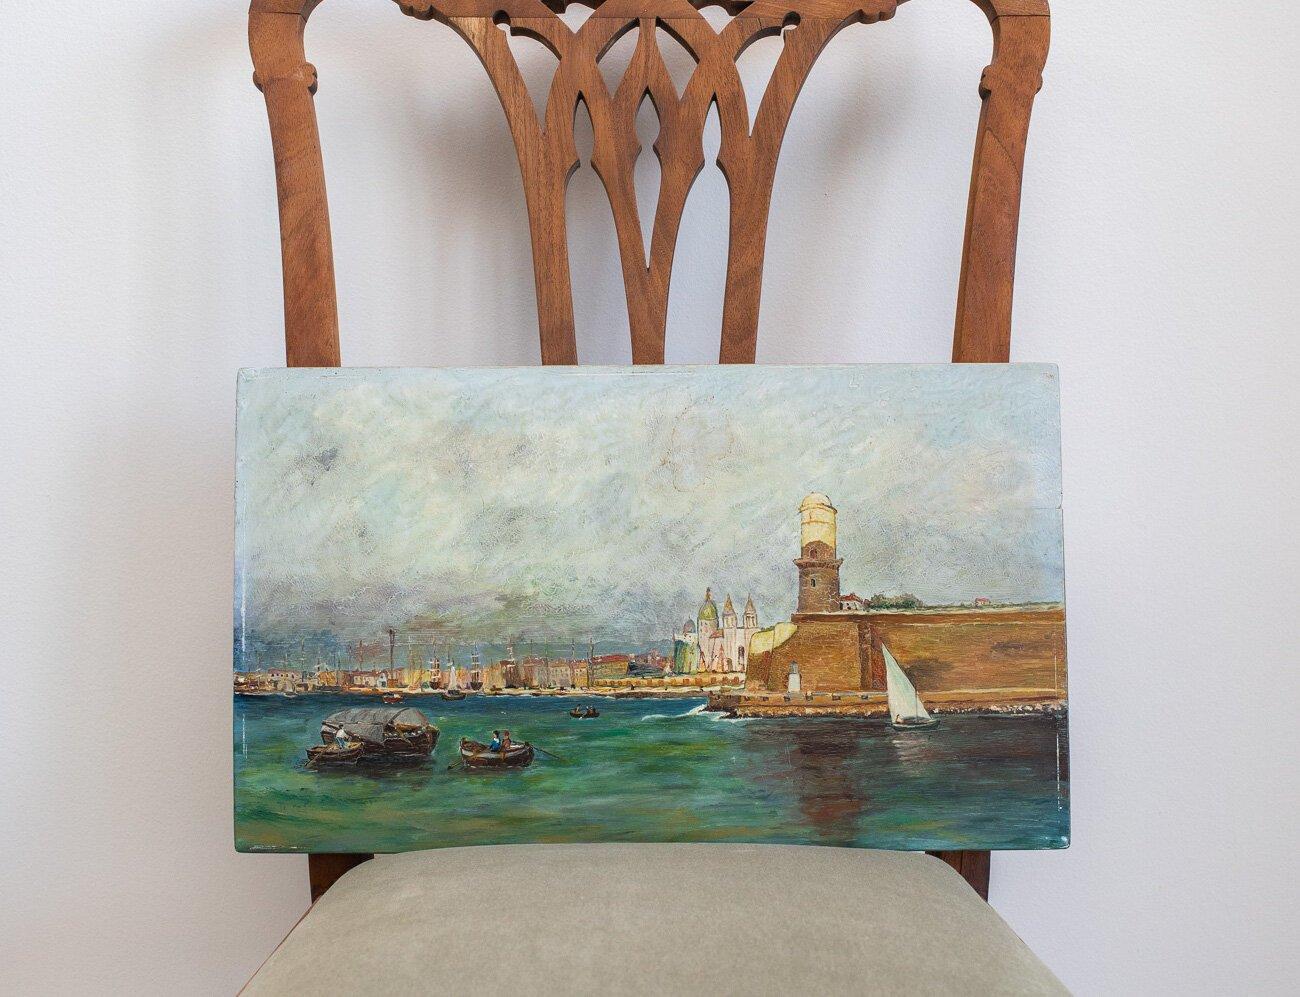 This one of a kind original artwork is a lovely oil painting of a seaport in Marseille, France in the 1800s. It is painted on a piece of wood and has no frame. The texture is very unique and beautiful.